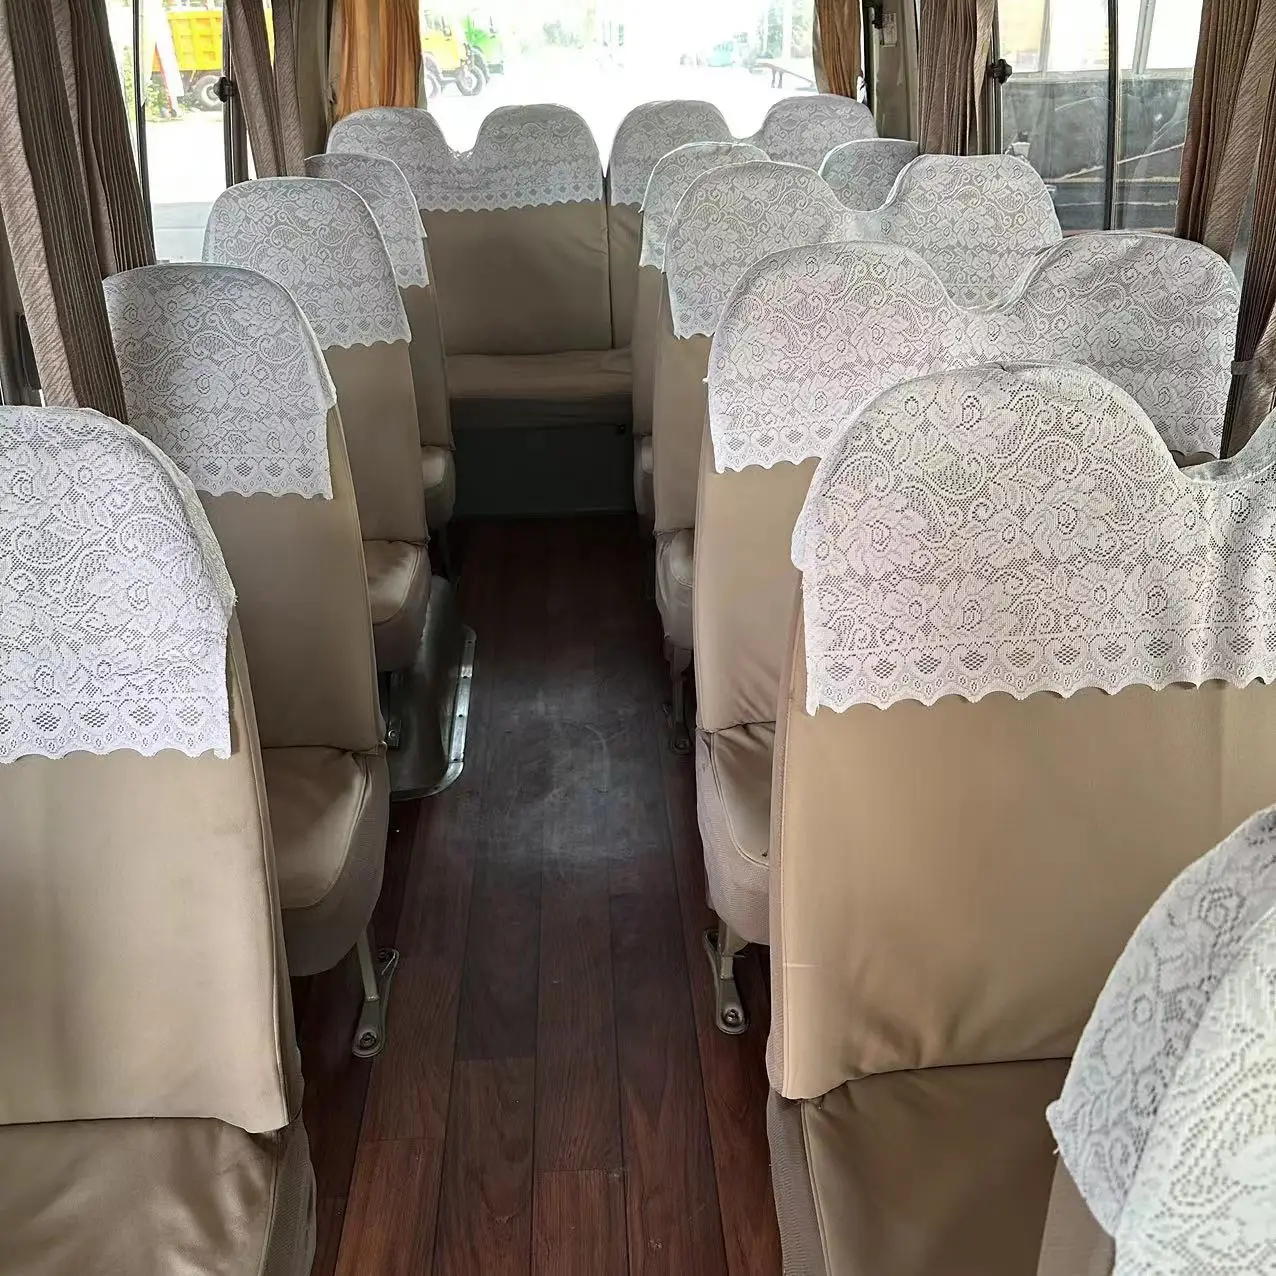 Six Cylinder Engine Parts 30 Seater Toyota Coster Bus Used For Sale